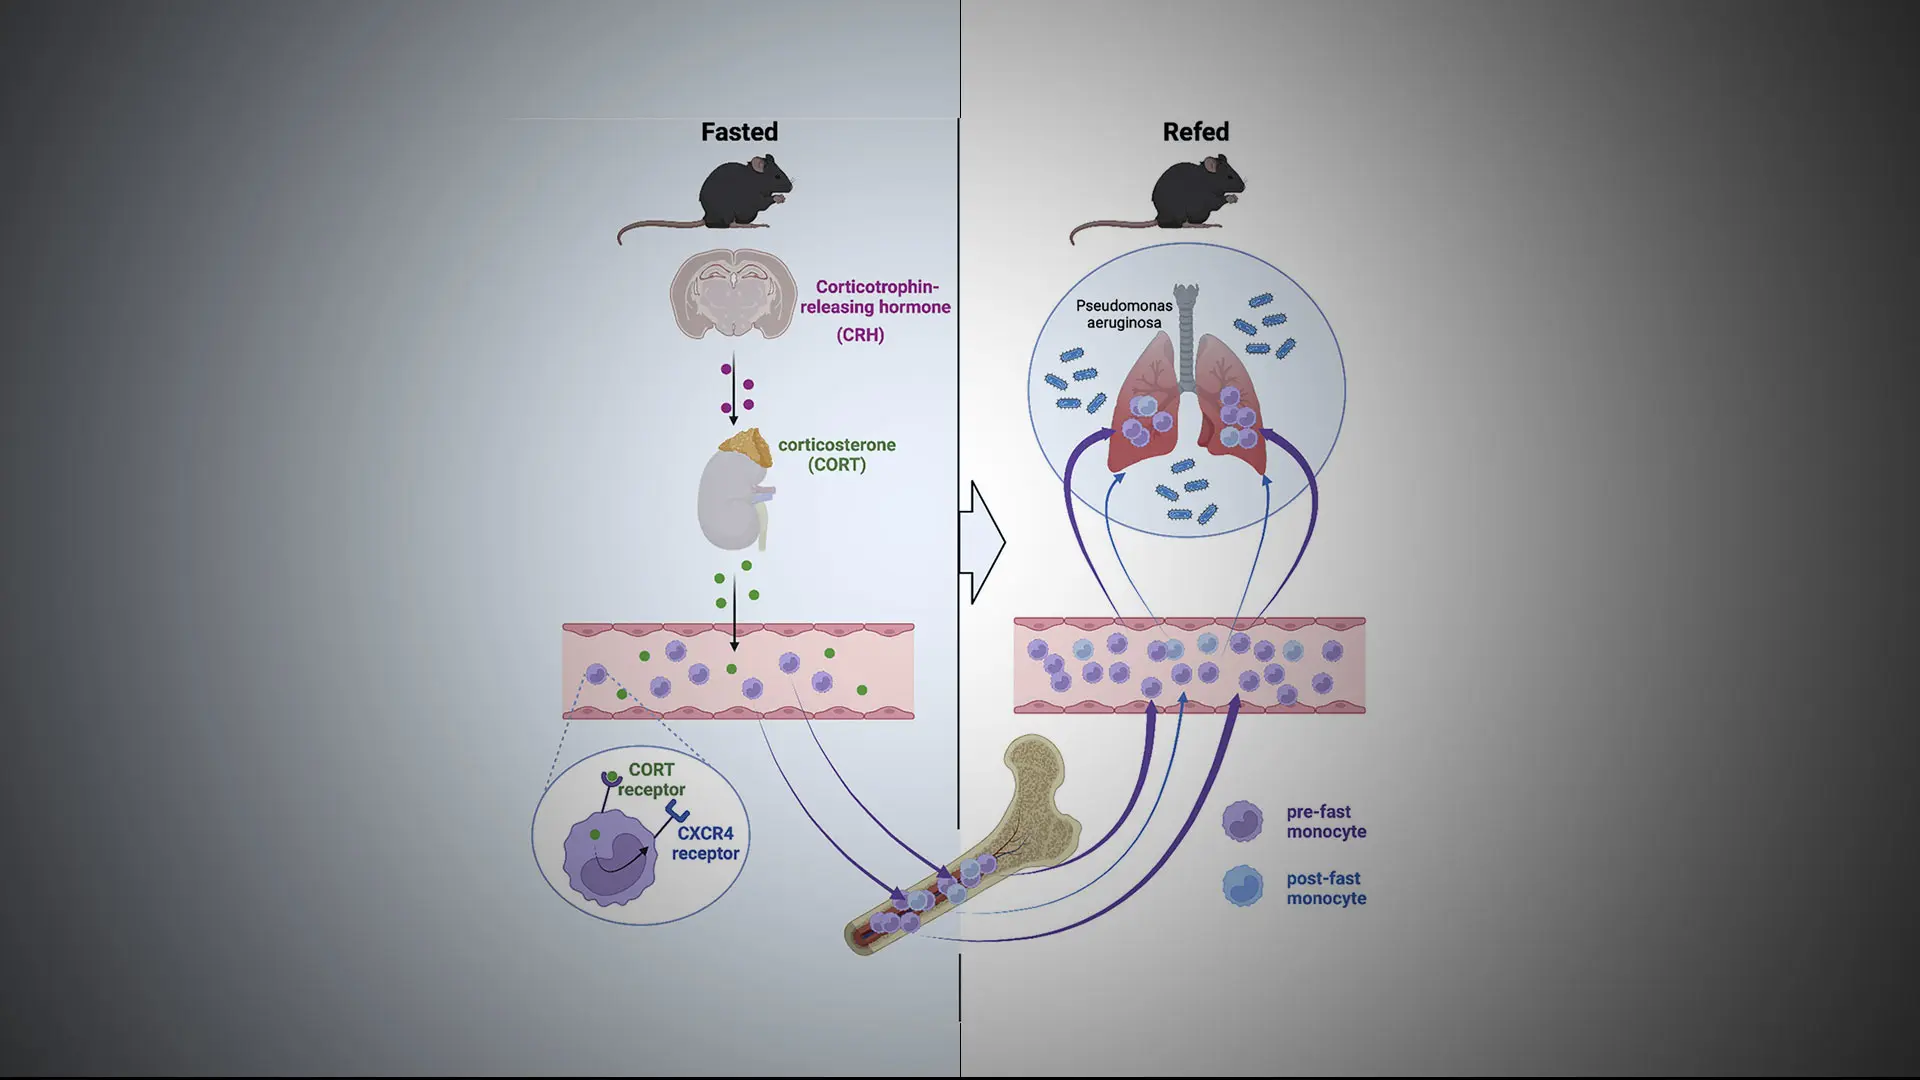 Study Shows Fasting Can Trigger a Negative Effect on Monocytes and Inflammation in Mouse Models